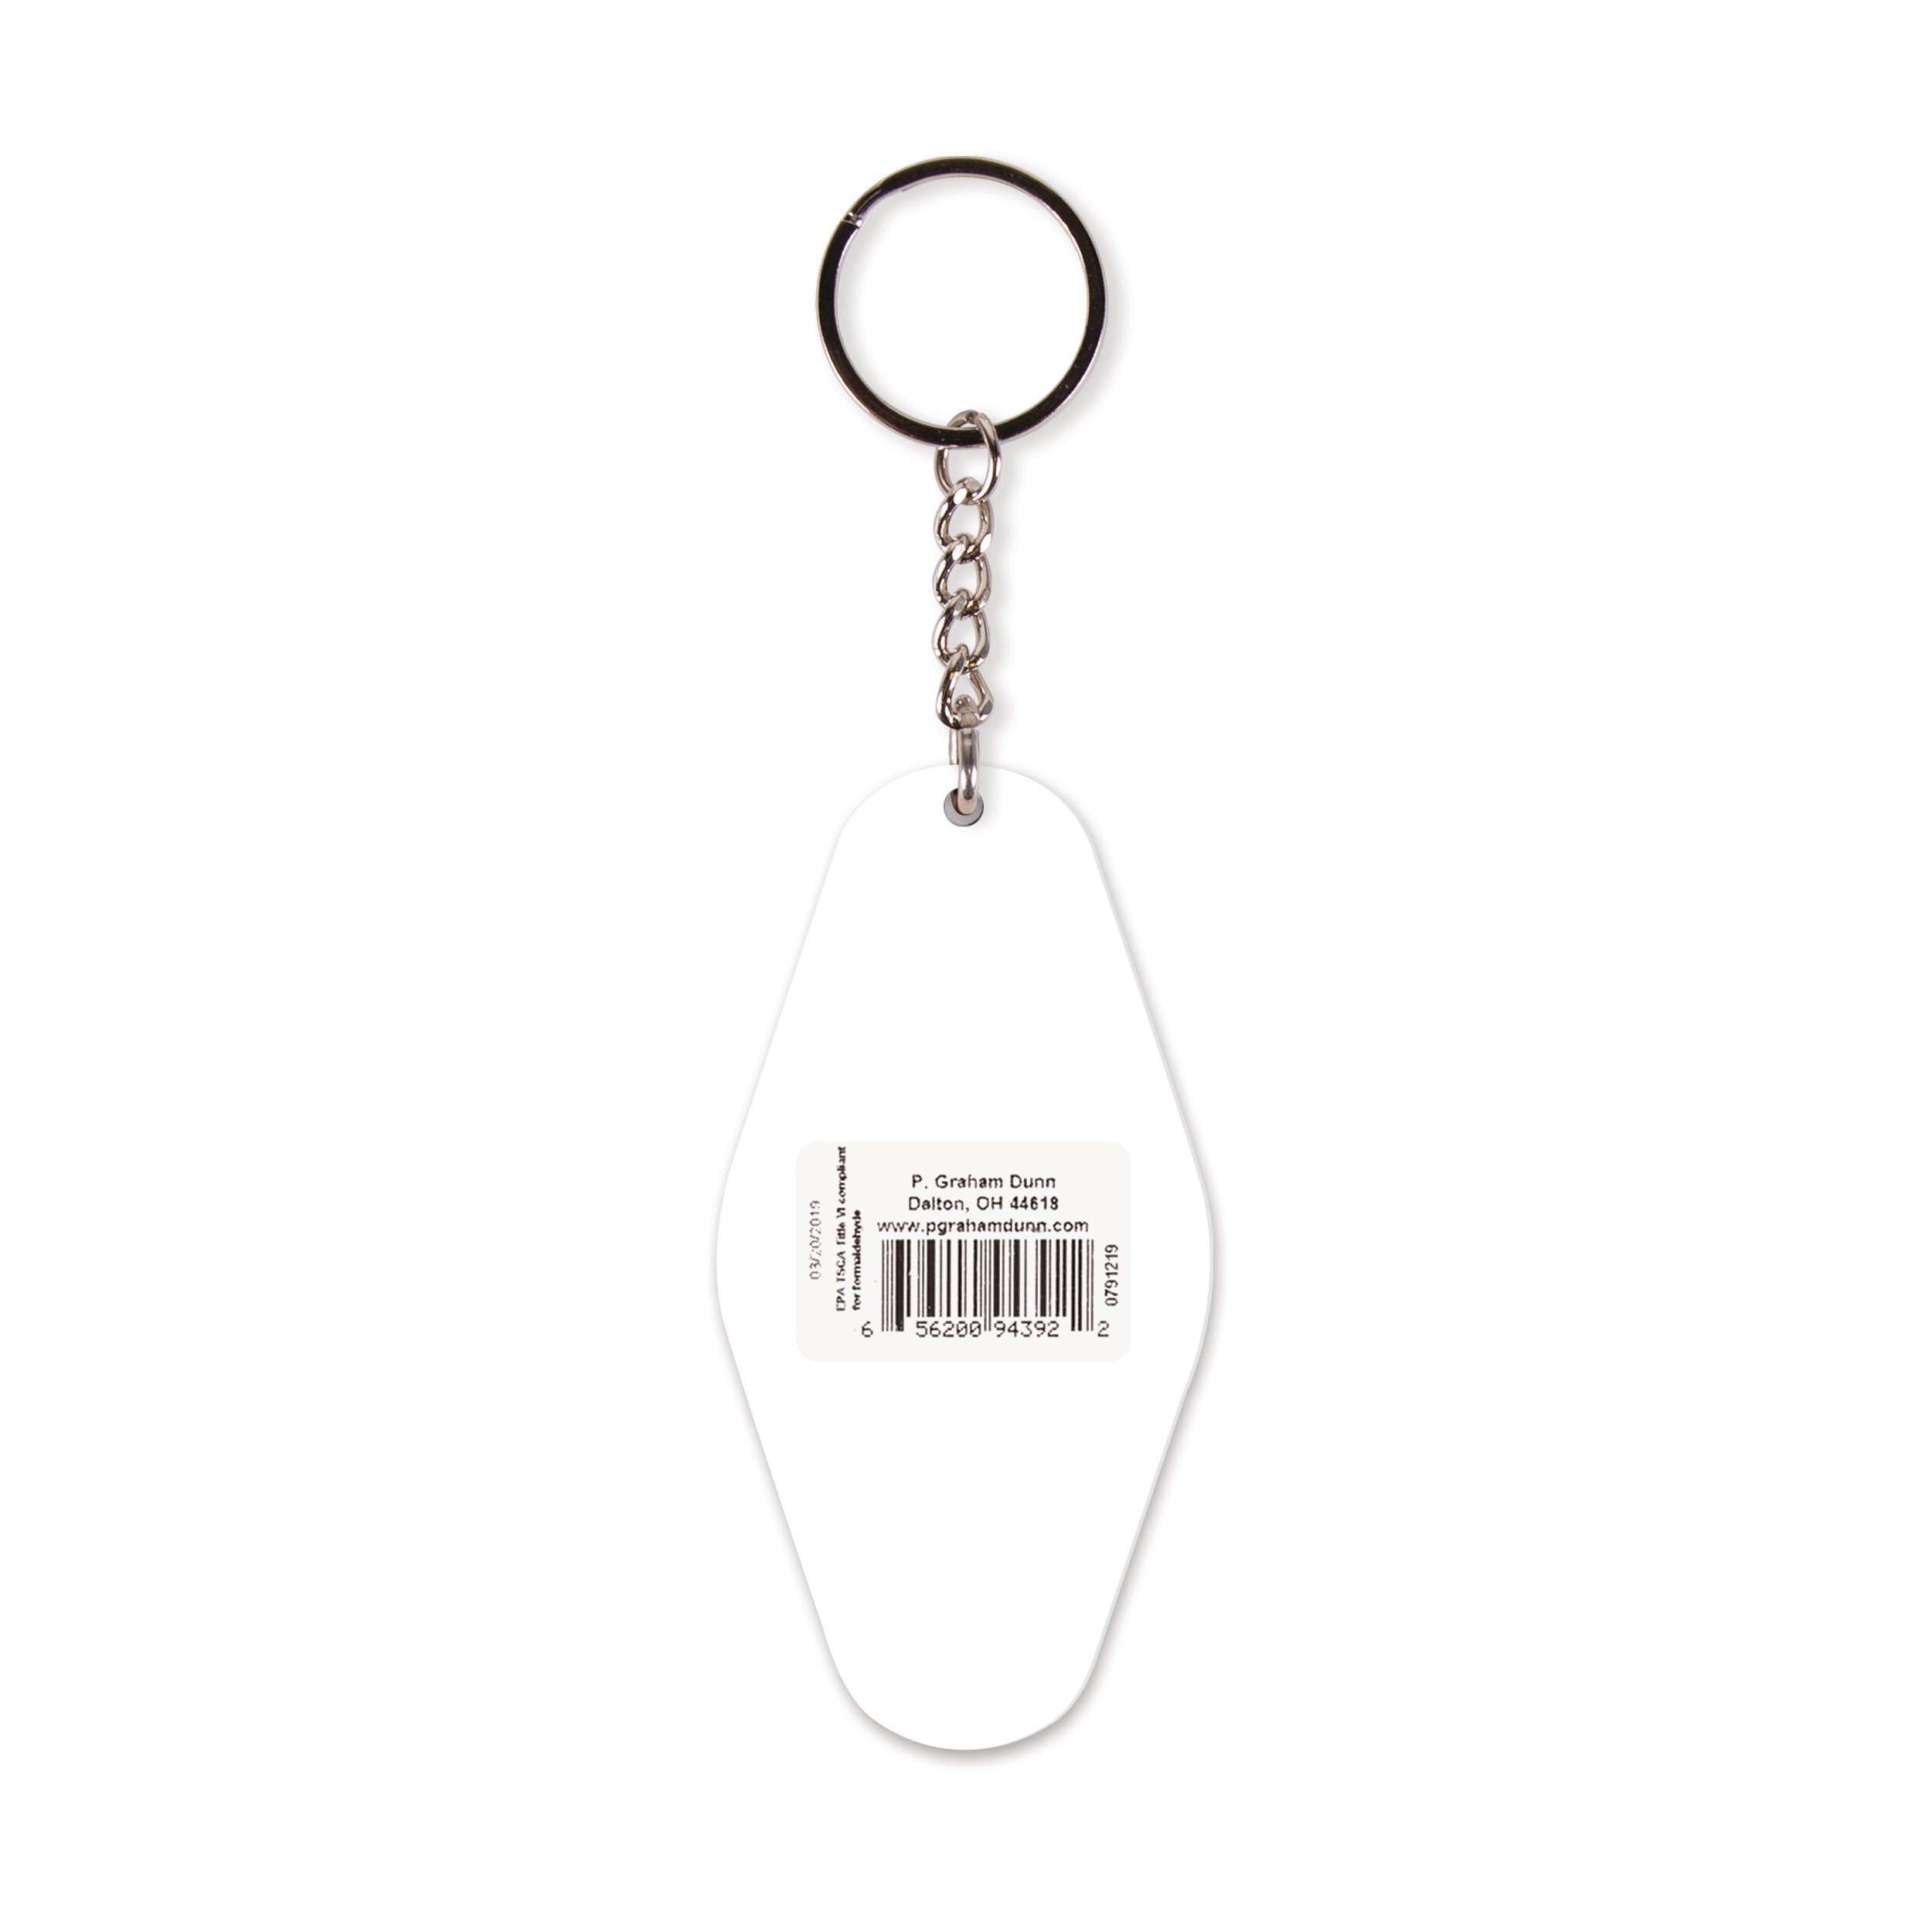 Bless Your Heart Vintage Engraved Key Chain